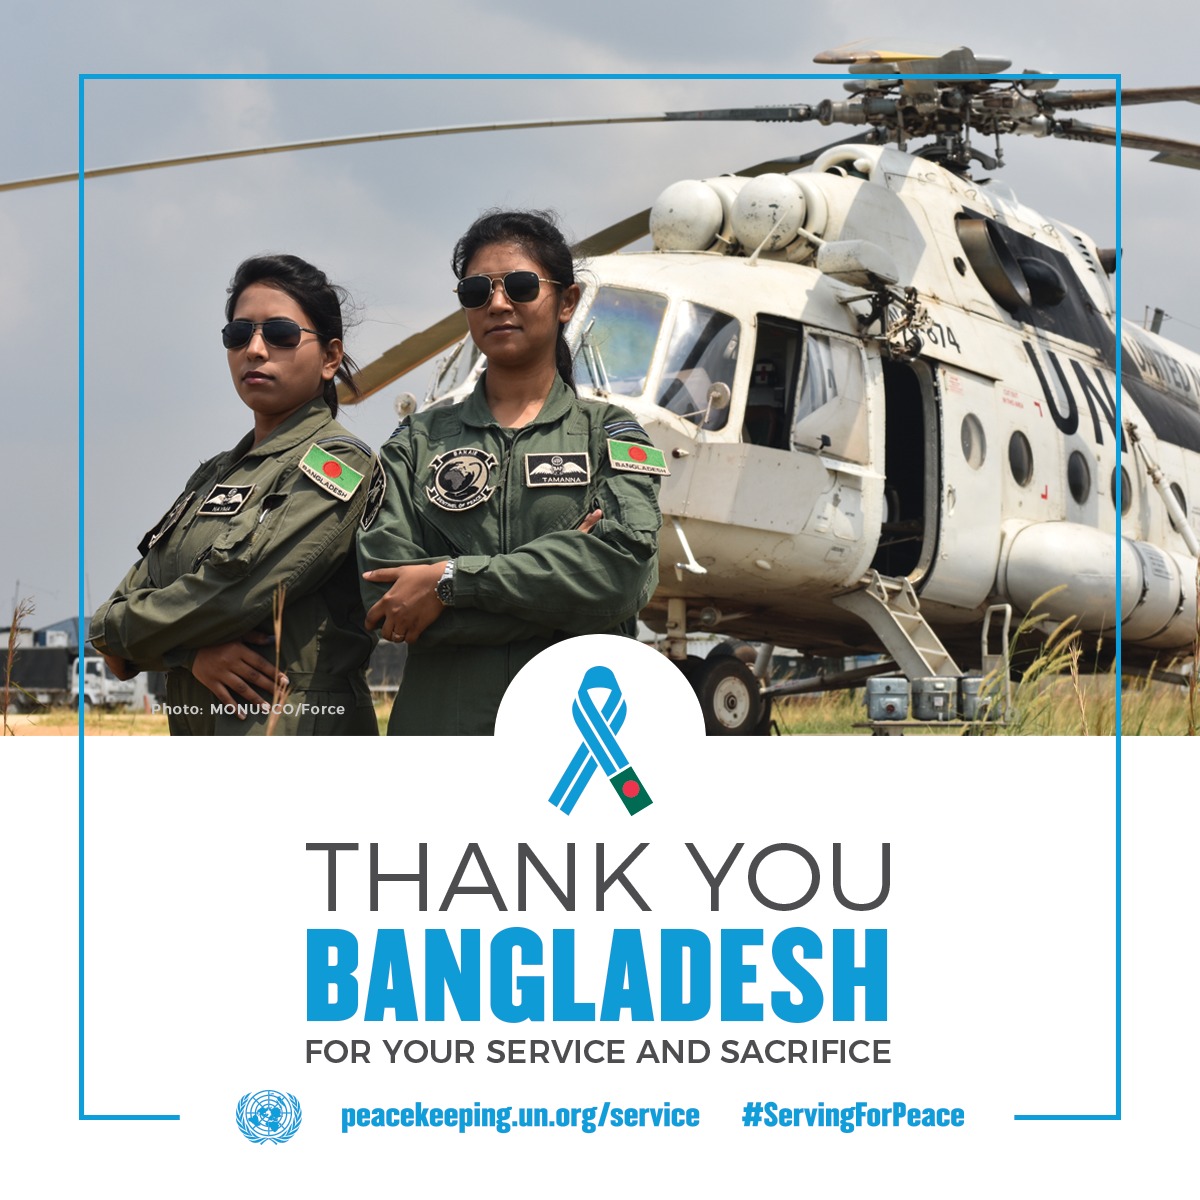 Pioneer female pilots deployed by MONUSCO’s bangladeshi Aviation unit (BANAIR) in Bunia. The two aviators are contributing their expertise in support of MONUSCO operations aimed at bringing peace and stability in the DRC